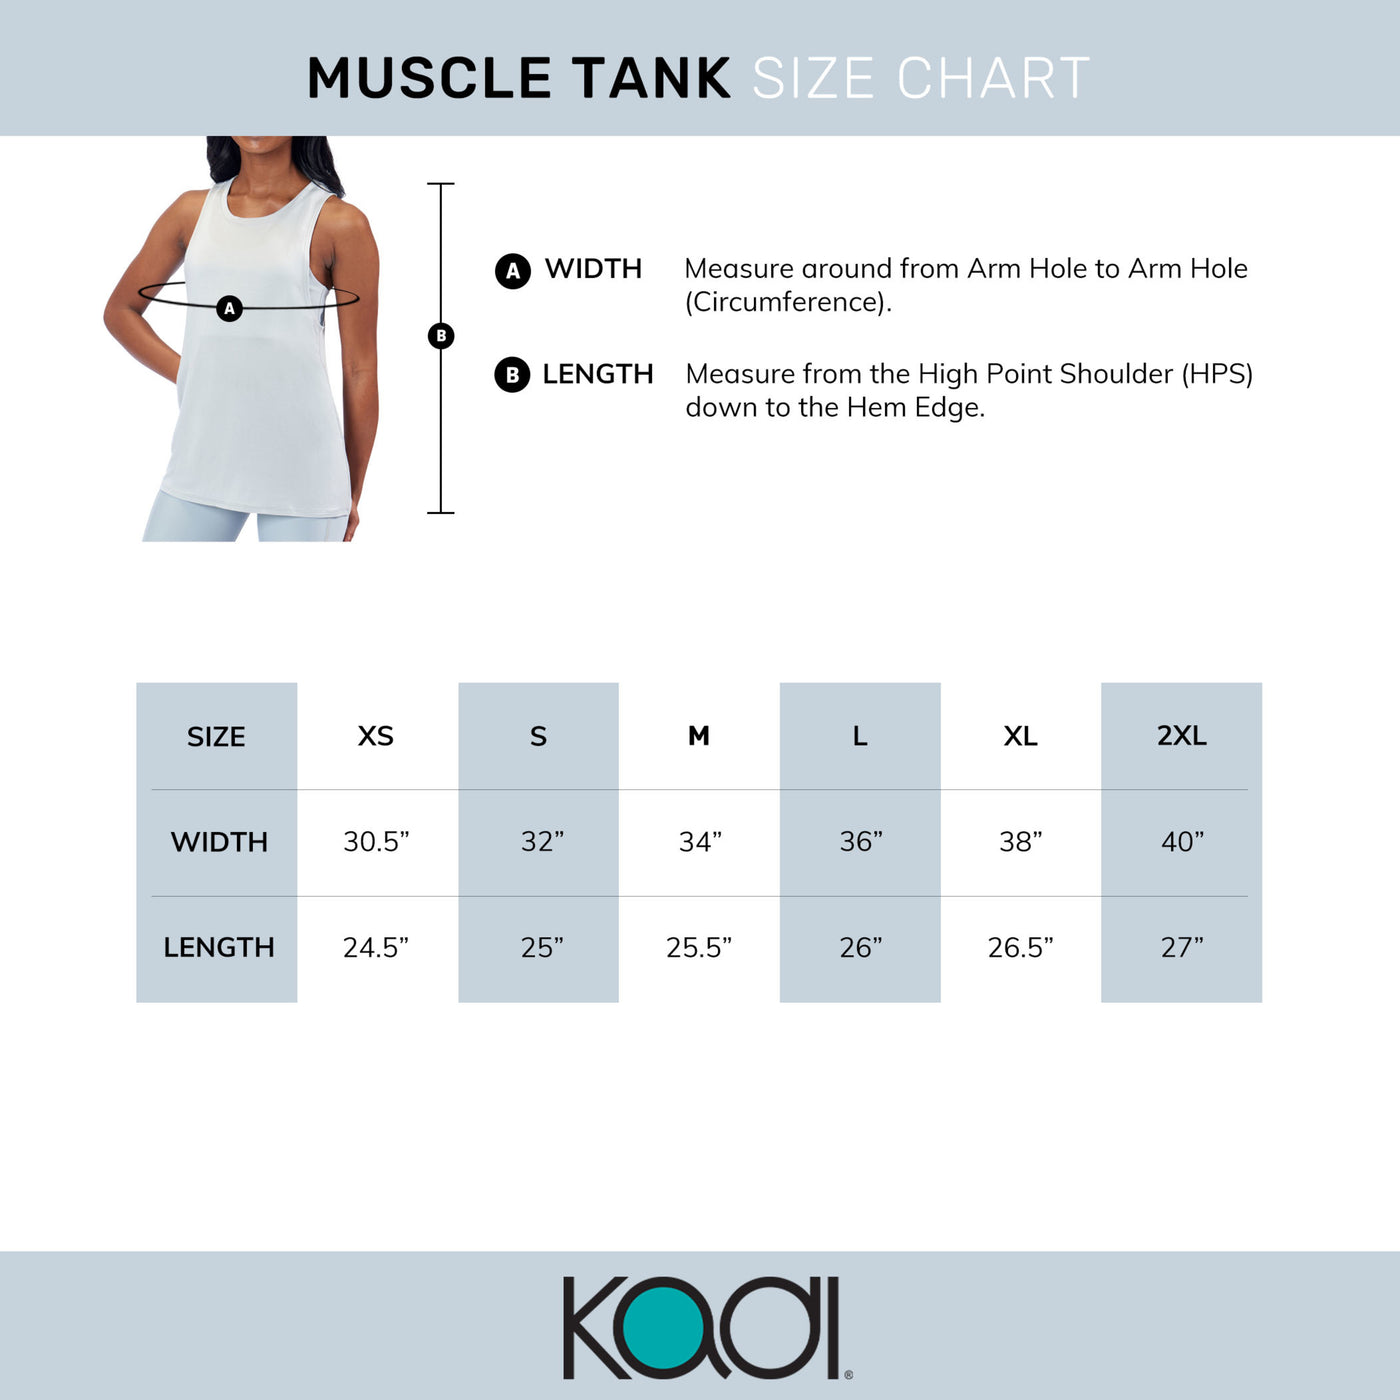 ASU Ladies Muscle Tank gray size chart for sizes XS through 2XL